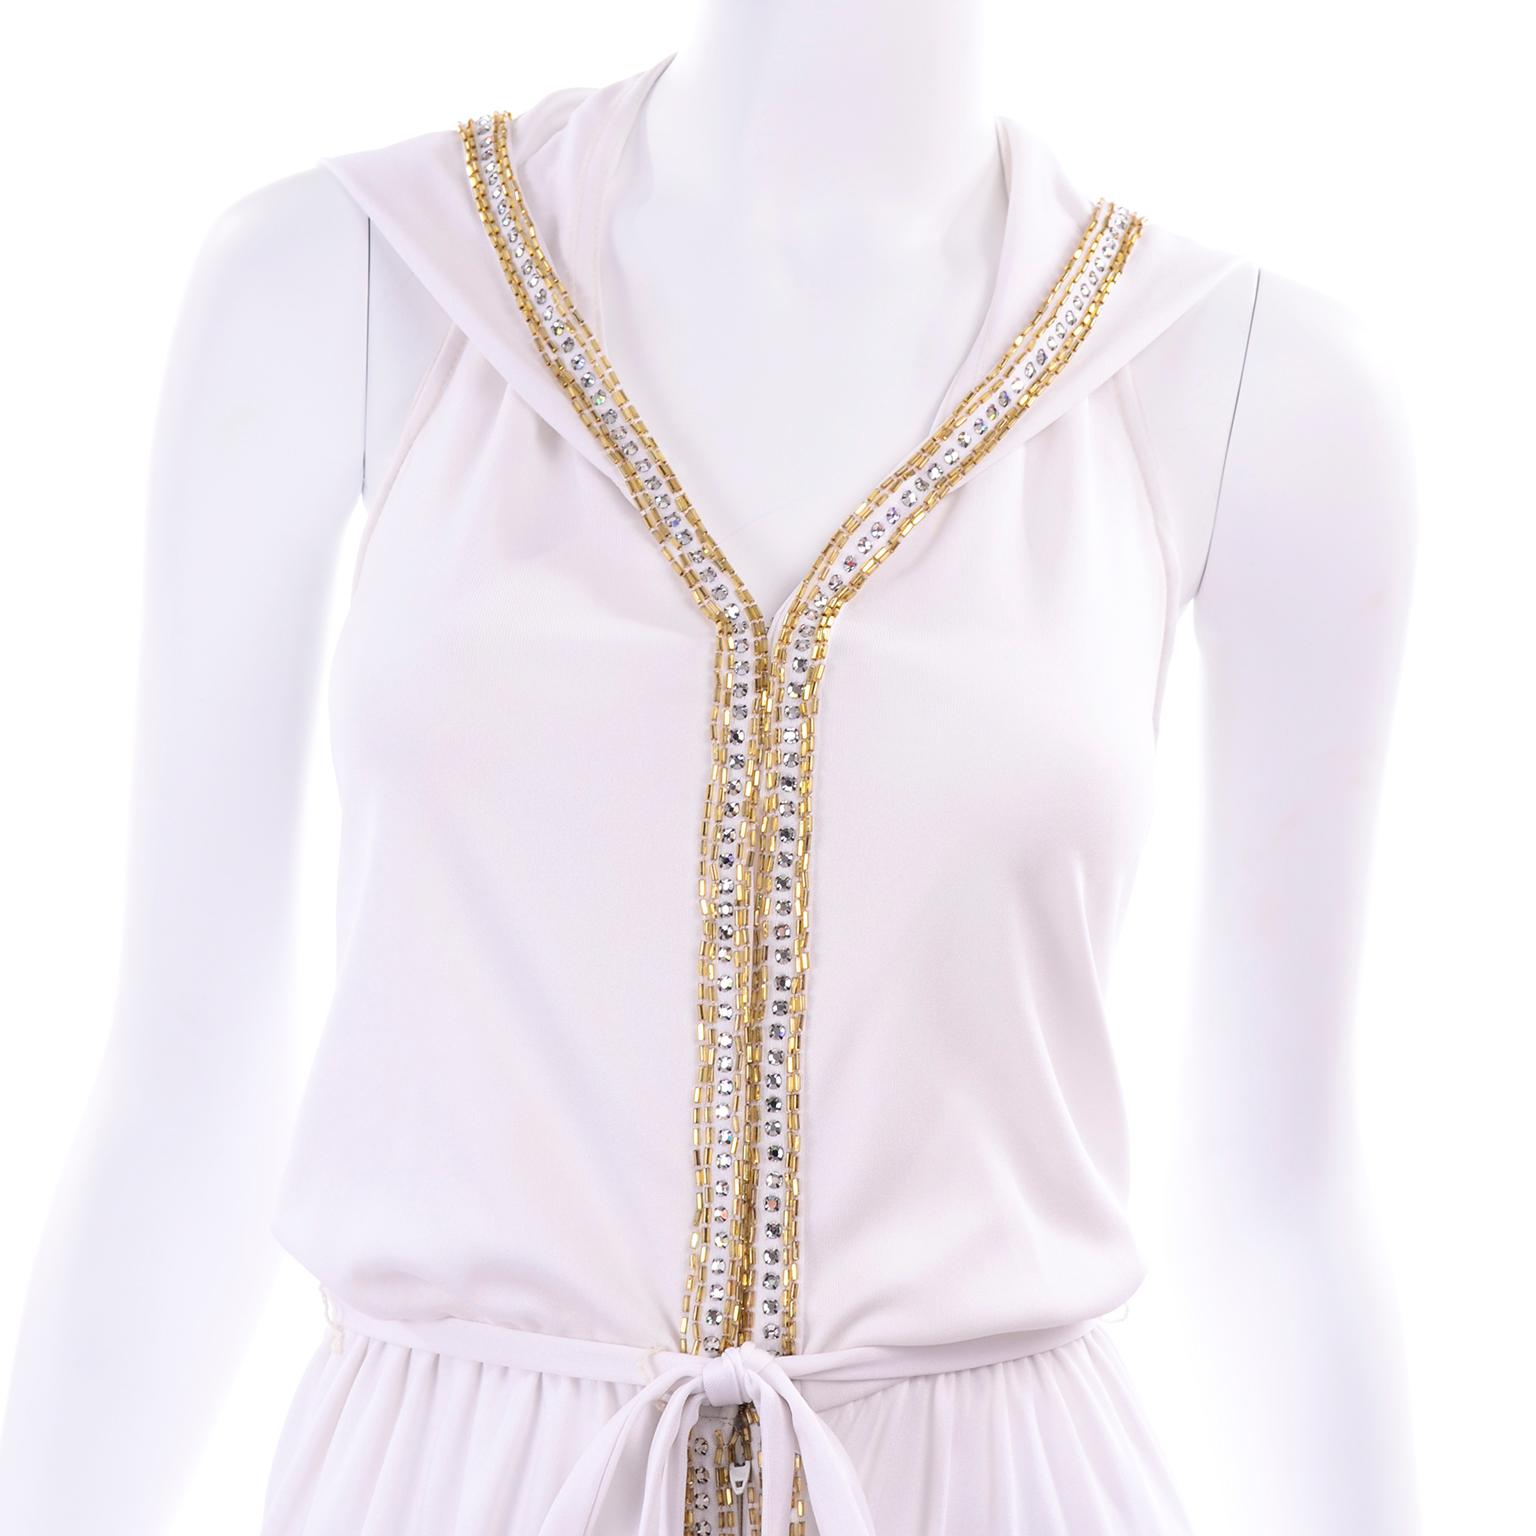 1970s Vintage White Hooded Jersey Maxi Dress With Gold Beads & Rhinestones 10